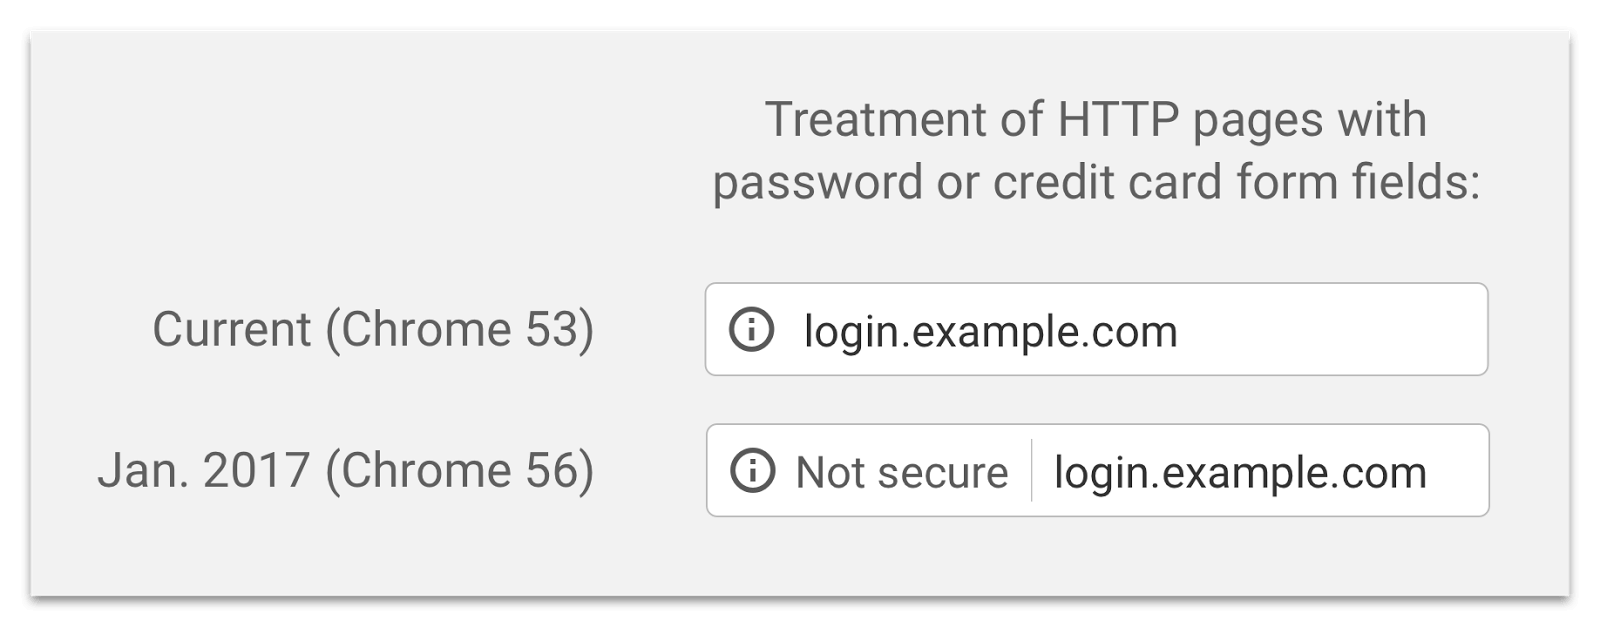 Imminent: Non-HTTPS Sites Labeled "Not Secure" by Chrome